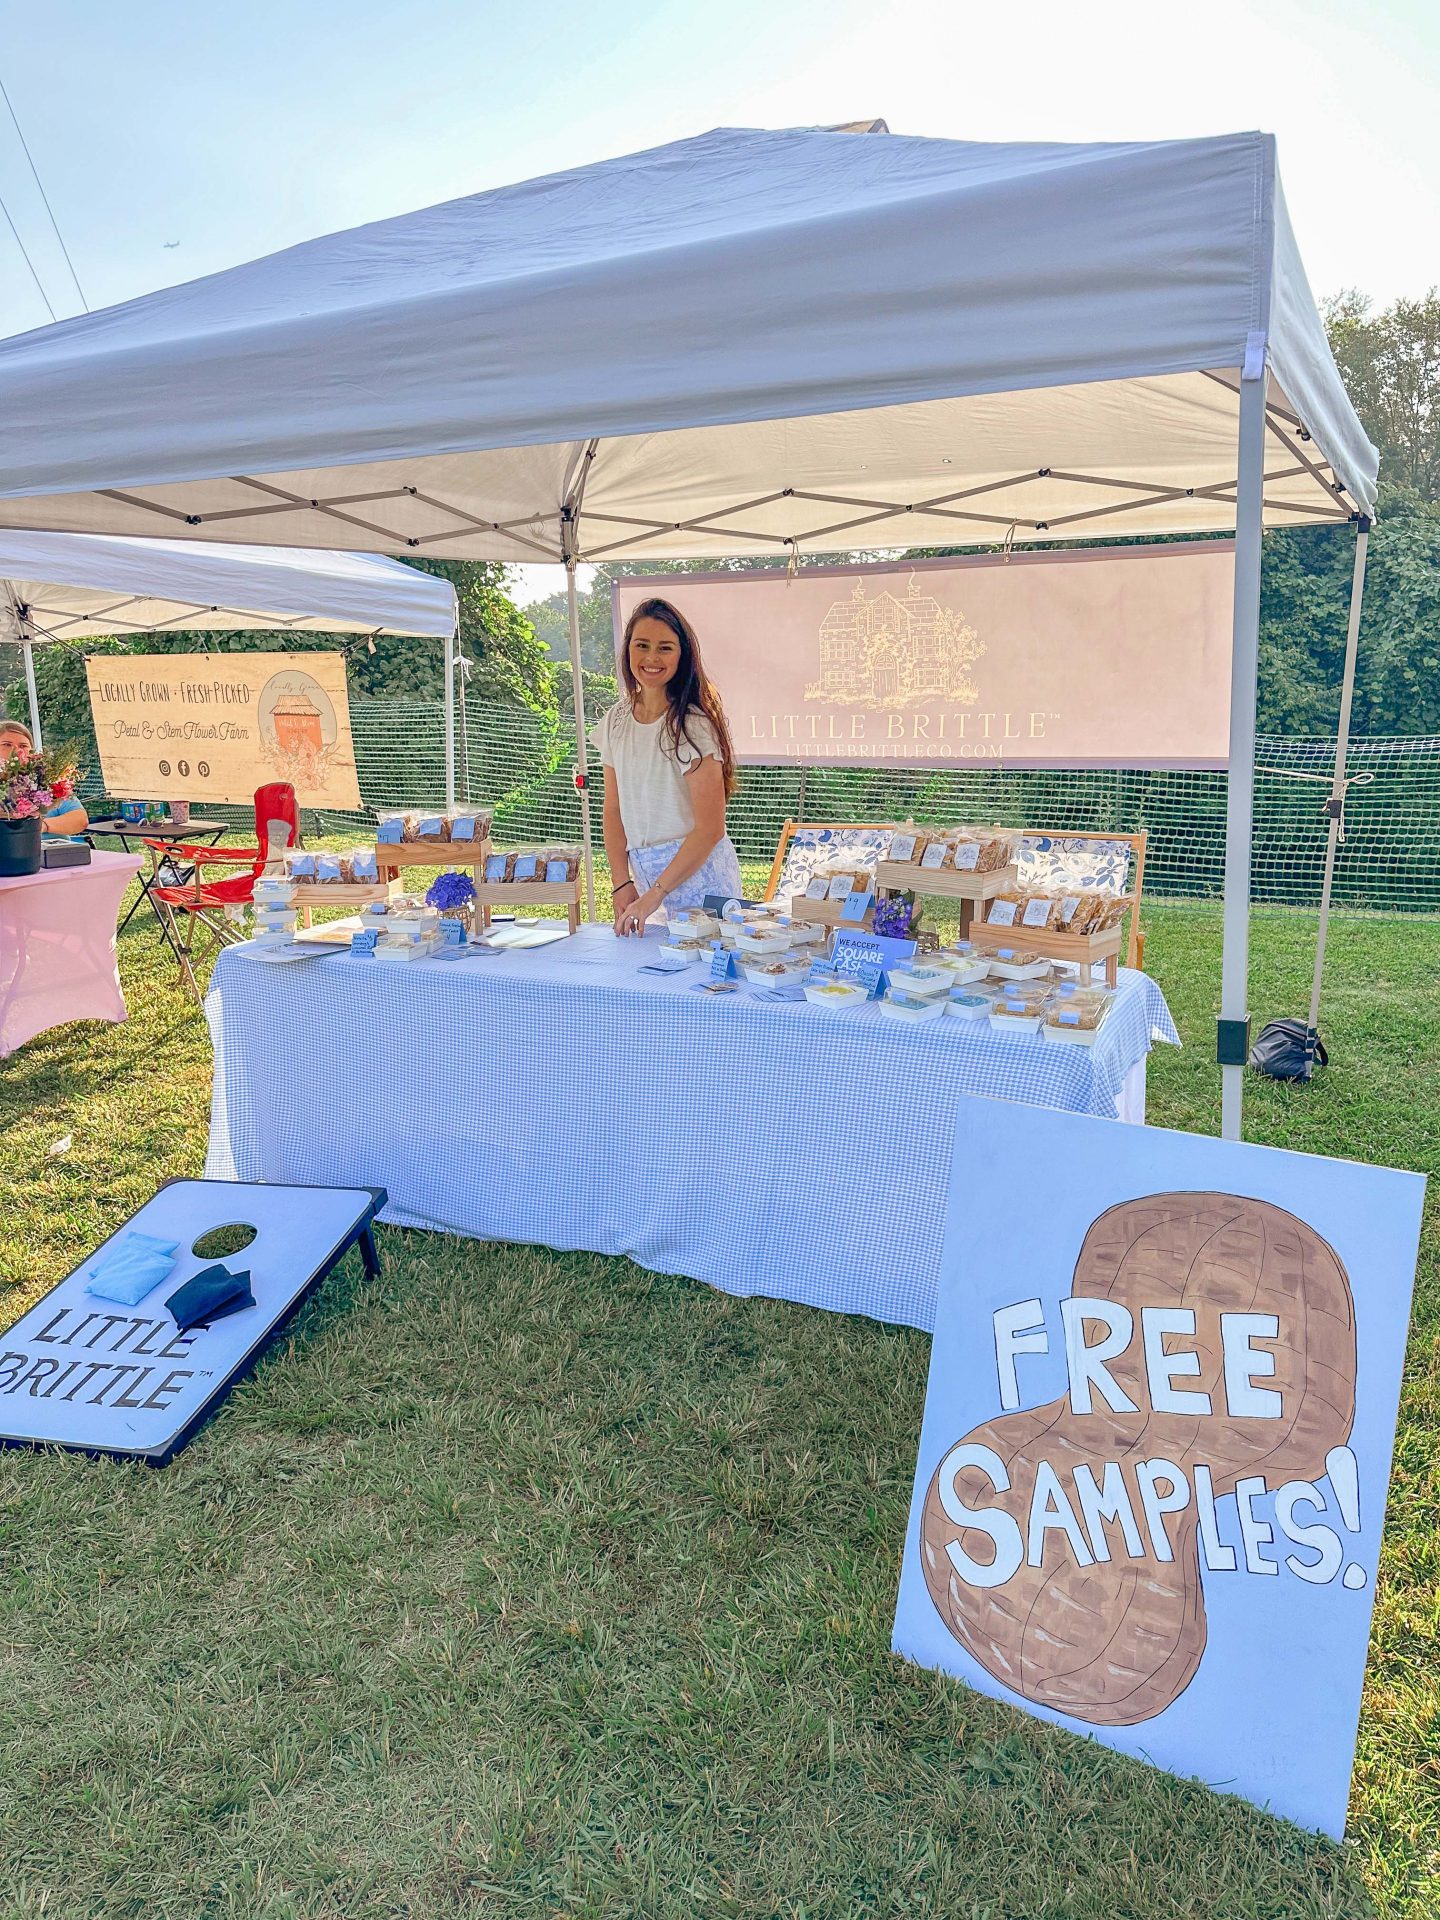 starting a business, little brittle llc, little brittle peanut brittle, little brittle, taralynn, owner of little brittle, moms starting businesses, how to start a business, my first farmers market, farmers market fort mill South Carolina, working, bakery, peanut brittle company, brittle company, the best brittle ever, maple cinnamon pecan brittle, marketing, business branding, cottage, business aesthetic, South Carolina business, South Carolina farmers market, town of fort mill, fort mill south Carolina, sourdough cinnamon rolls, commercial kitchen, best brittle in South Carolina, starting a business as a mom 